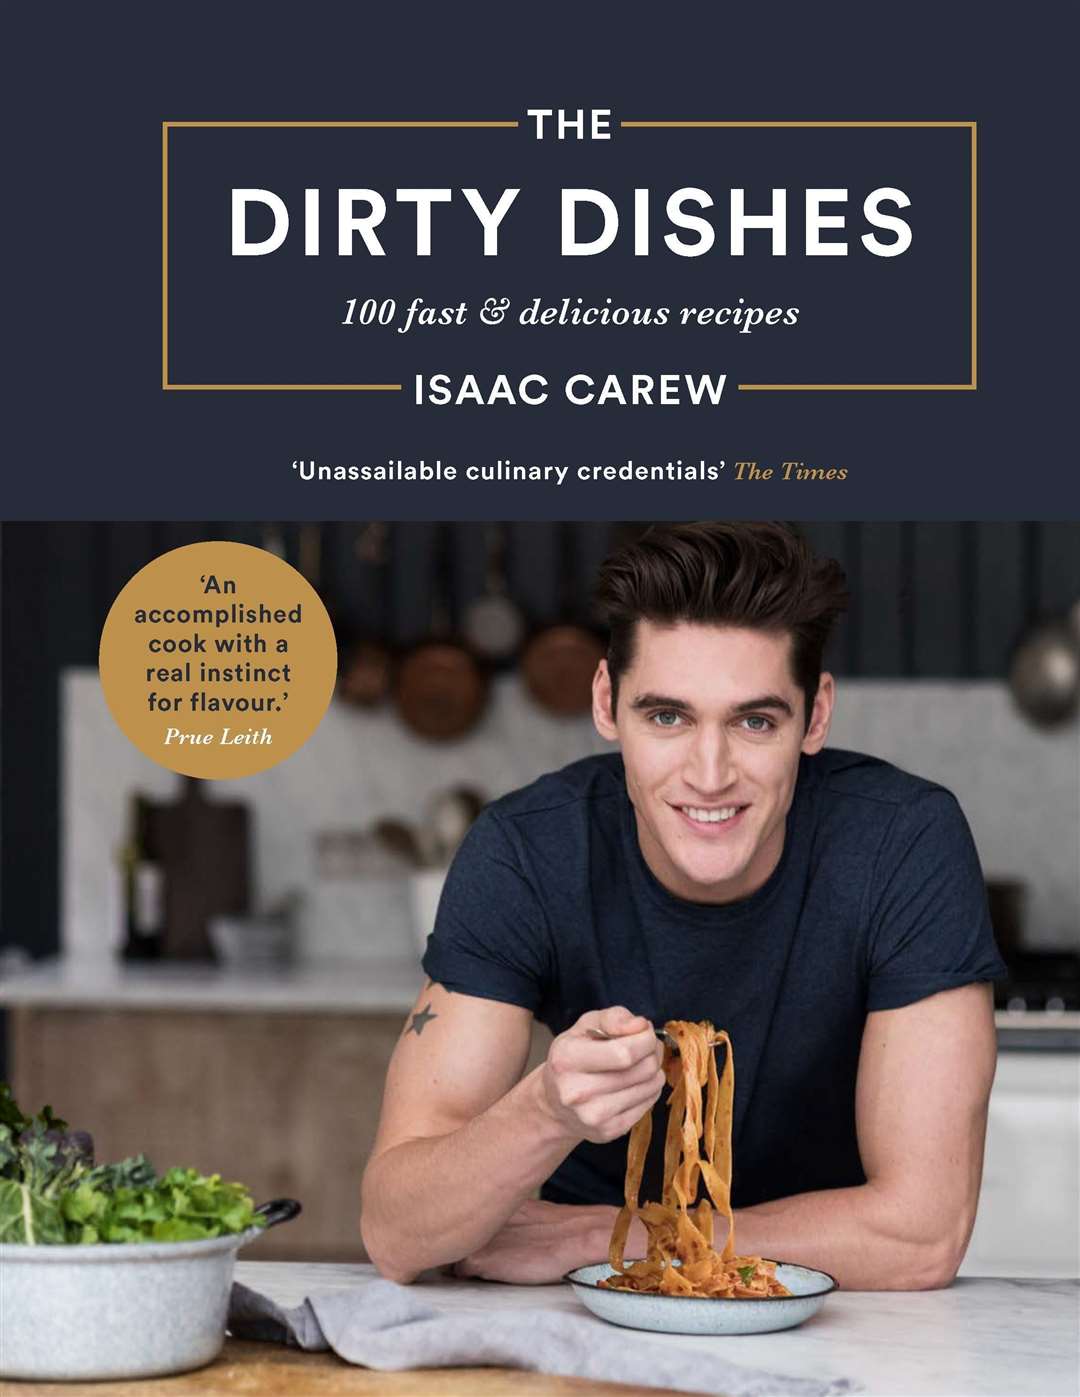 The Dirty Dishes: 100 Fast And Delicious Recipes by Isaac Carew is published by Bluebird, priced £20. Picture: Susan Bell/PA